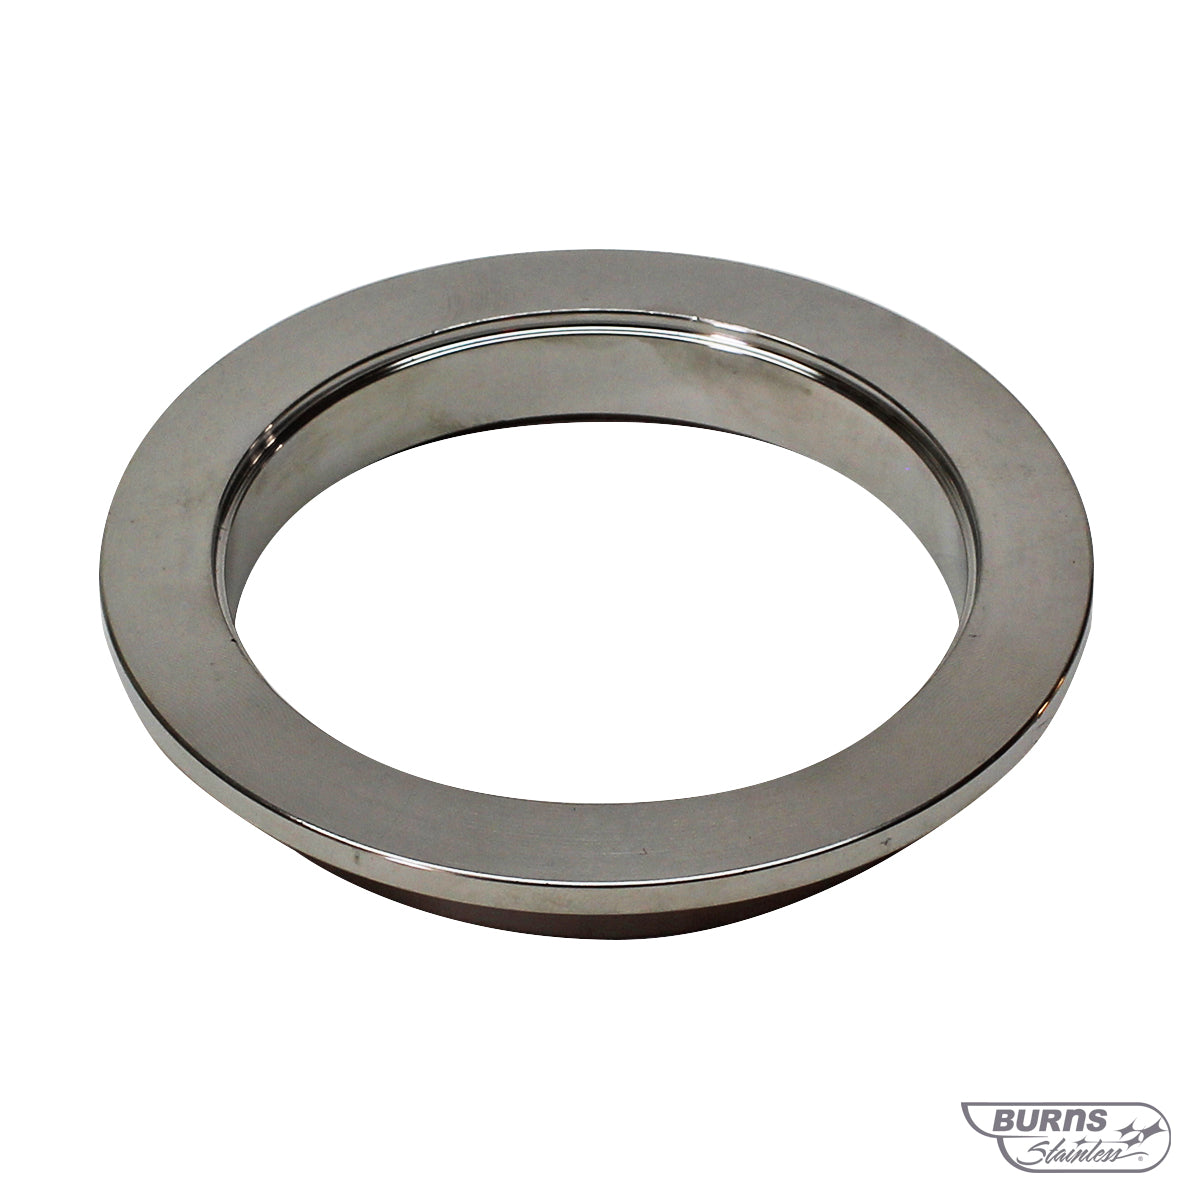 Machined Stainless Steel Flanges - V Band